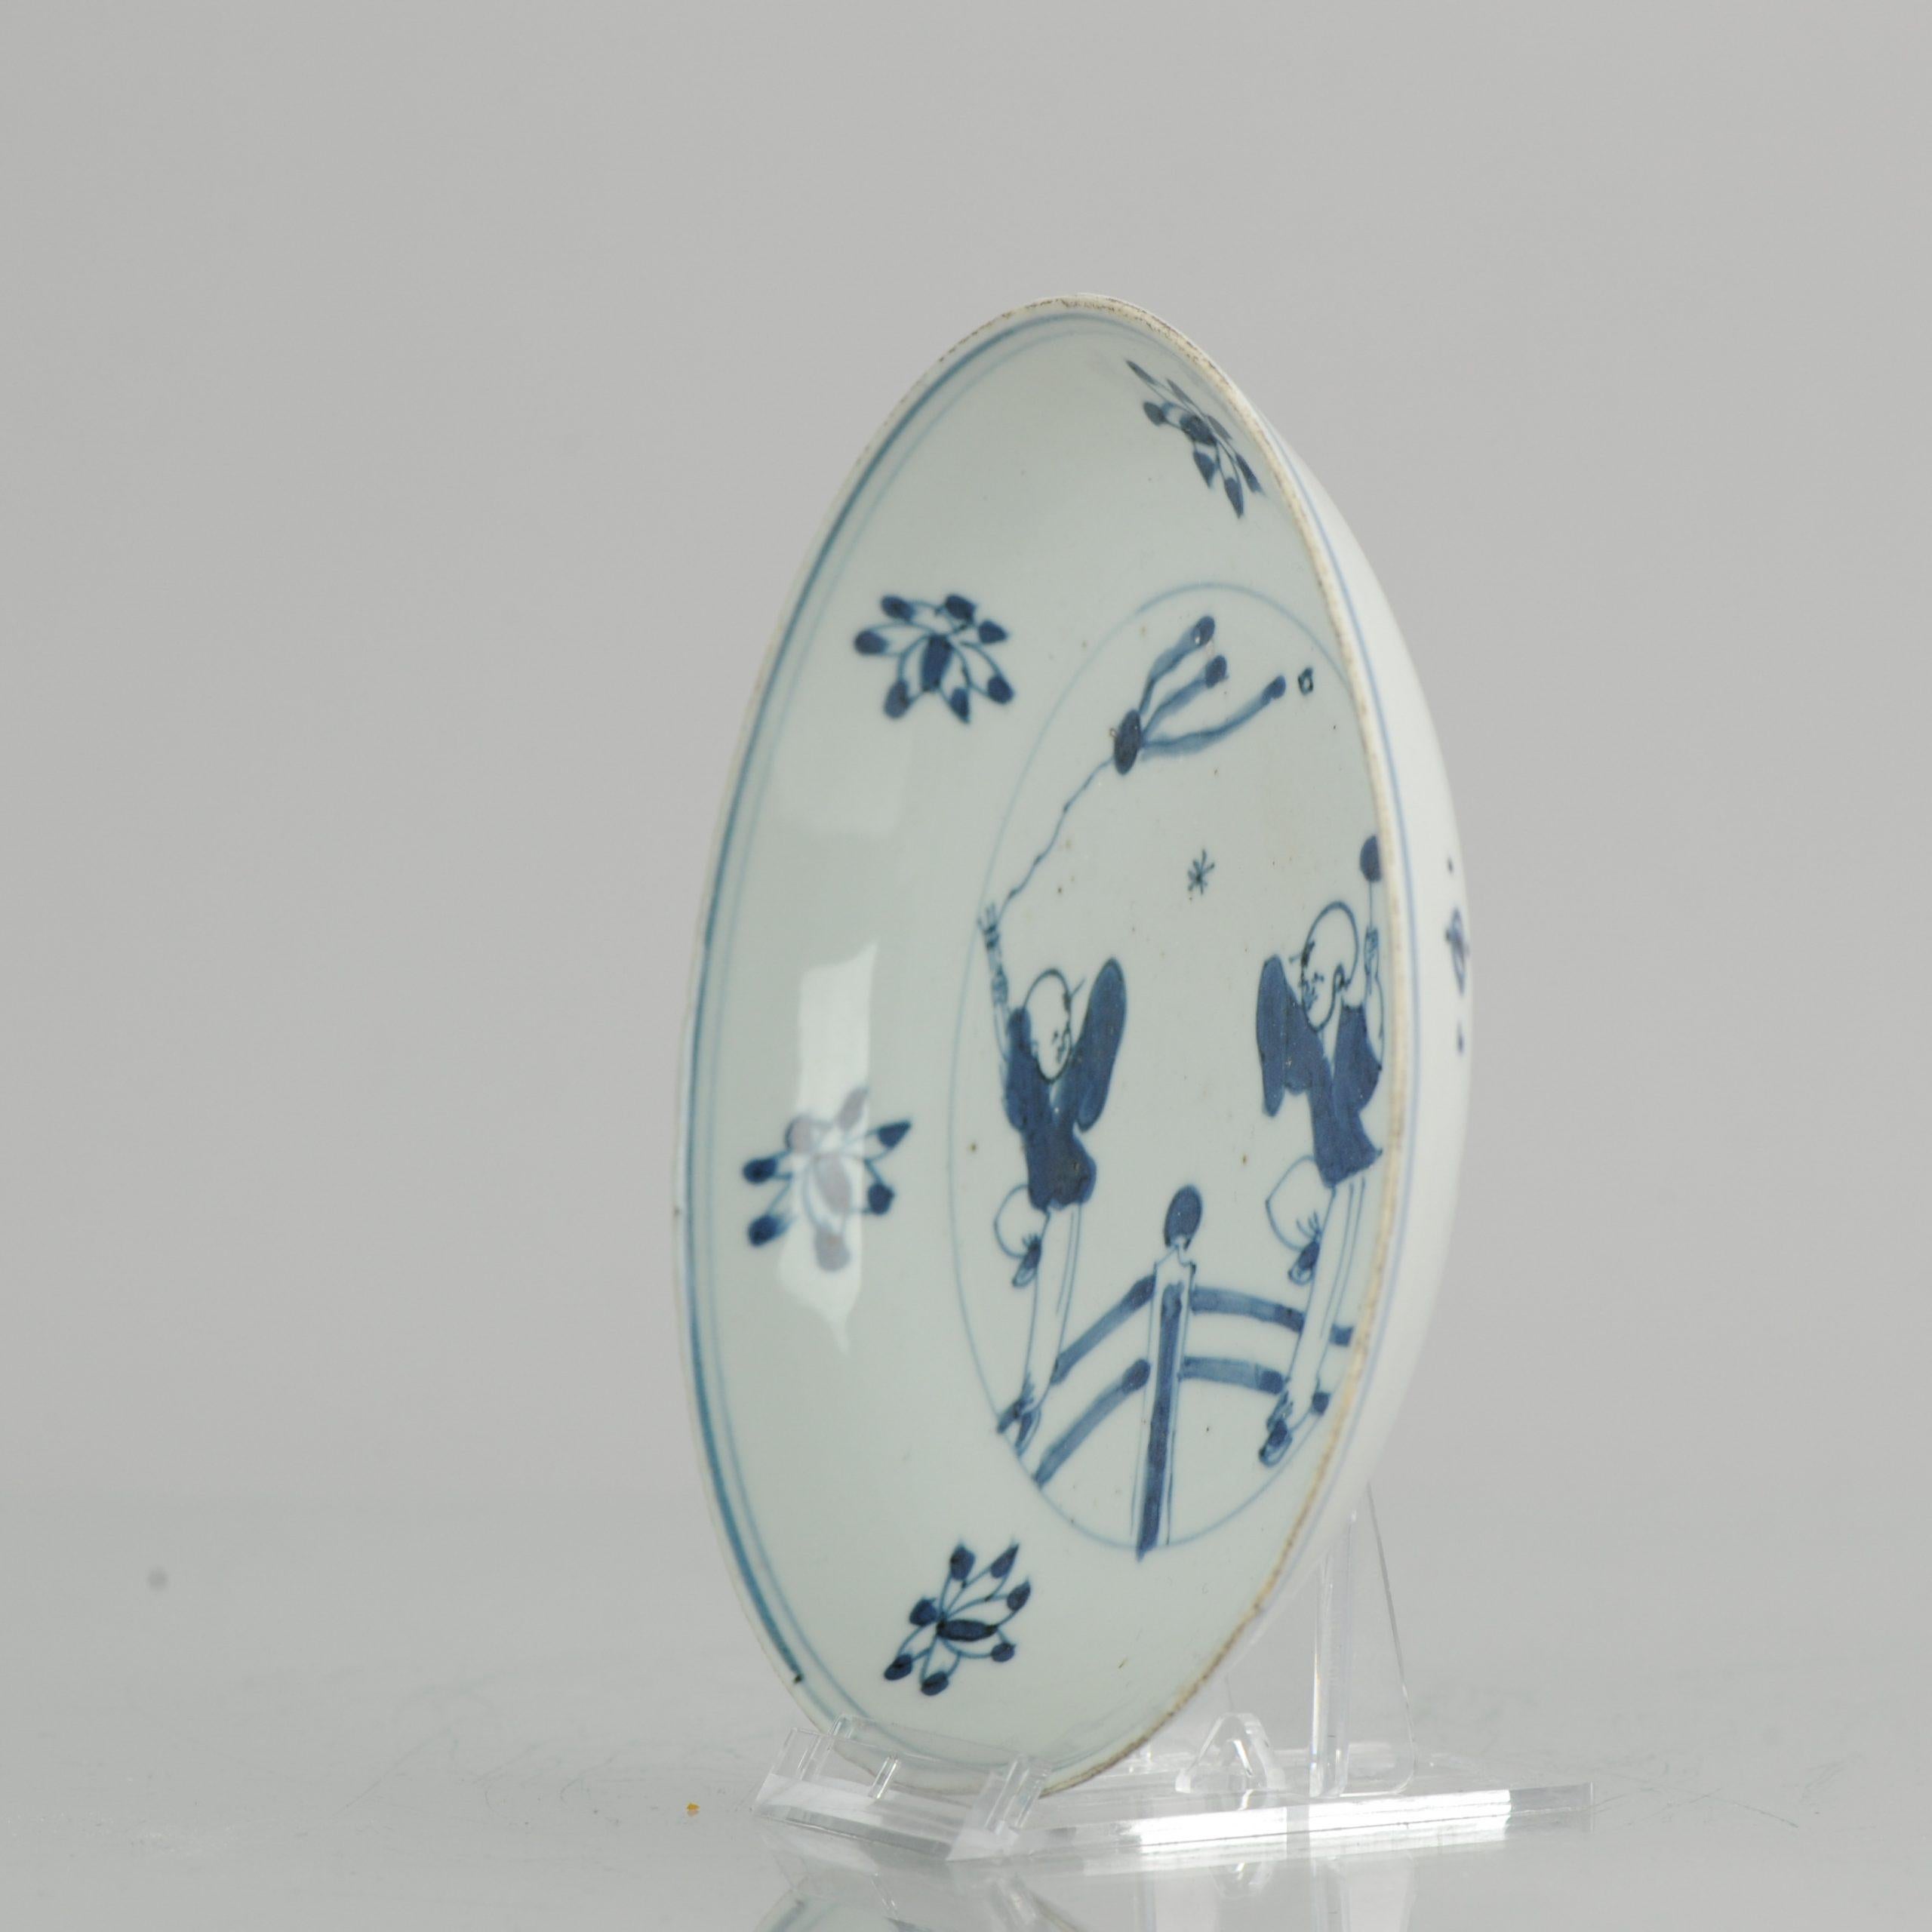 A very nicely decorated plate. A late Ming Ksometsuke porcelain dish, Tianqi or Chongzhen period 1621-1644.
Painted with a deer, monkey, butterfly, bird and pine tree.

For similar examples of this listing see:

Butz, Herbertm, M. & Kawahara,